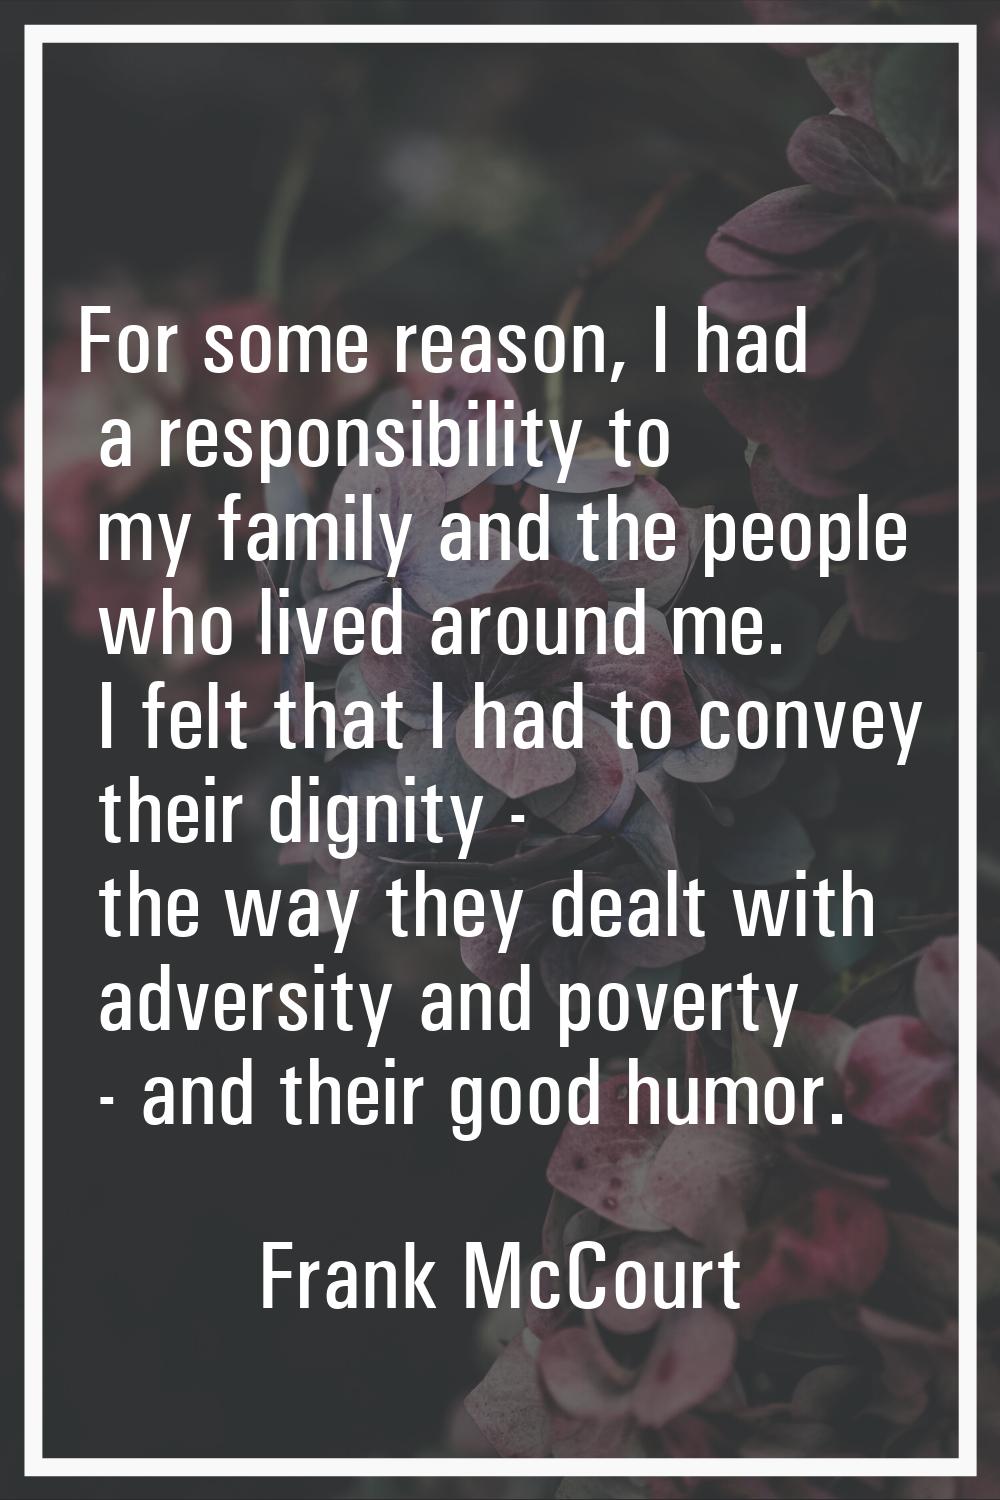 For some reason, I had a responsibility to my family and the people who lived around me. I felt tha